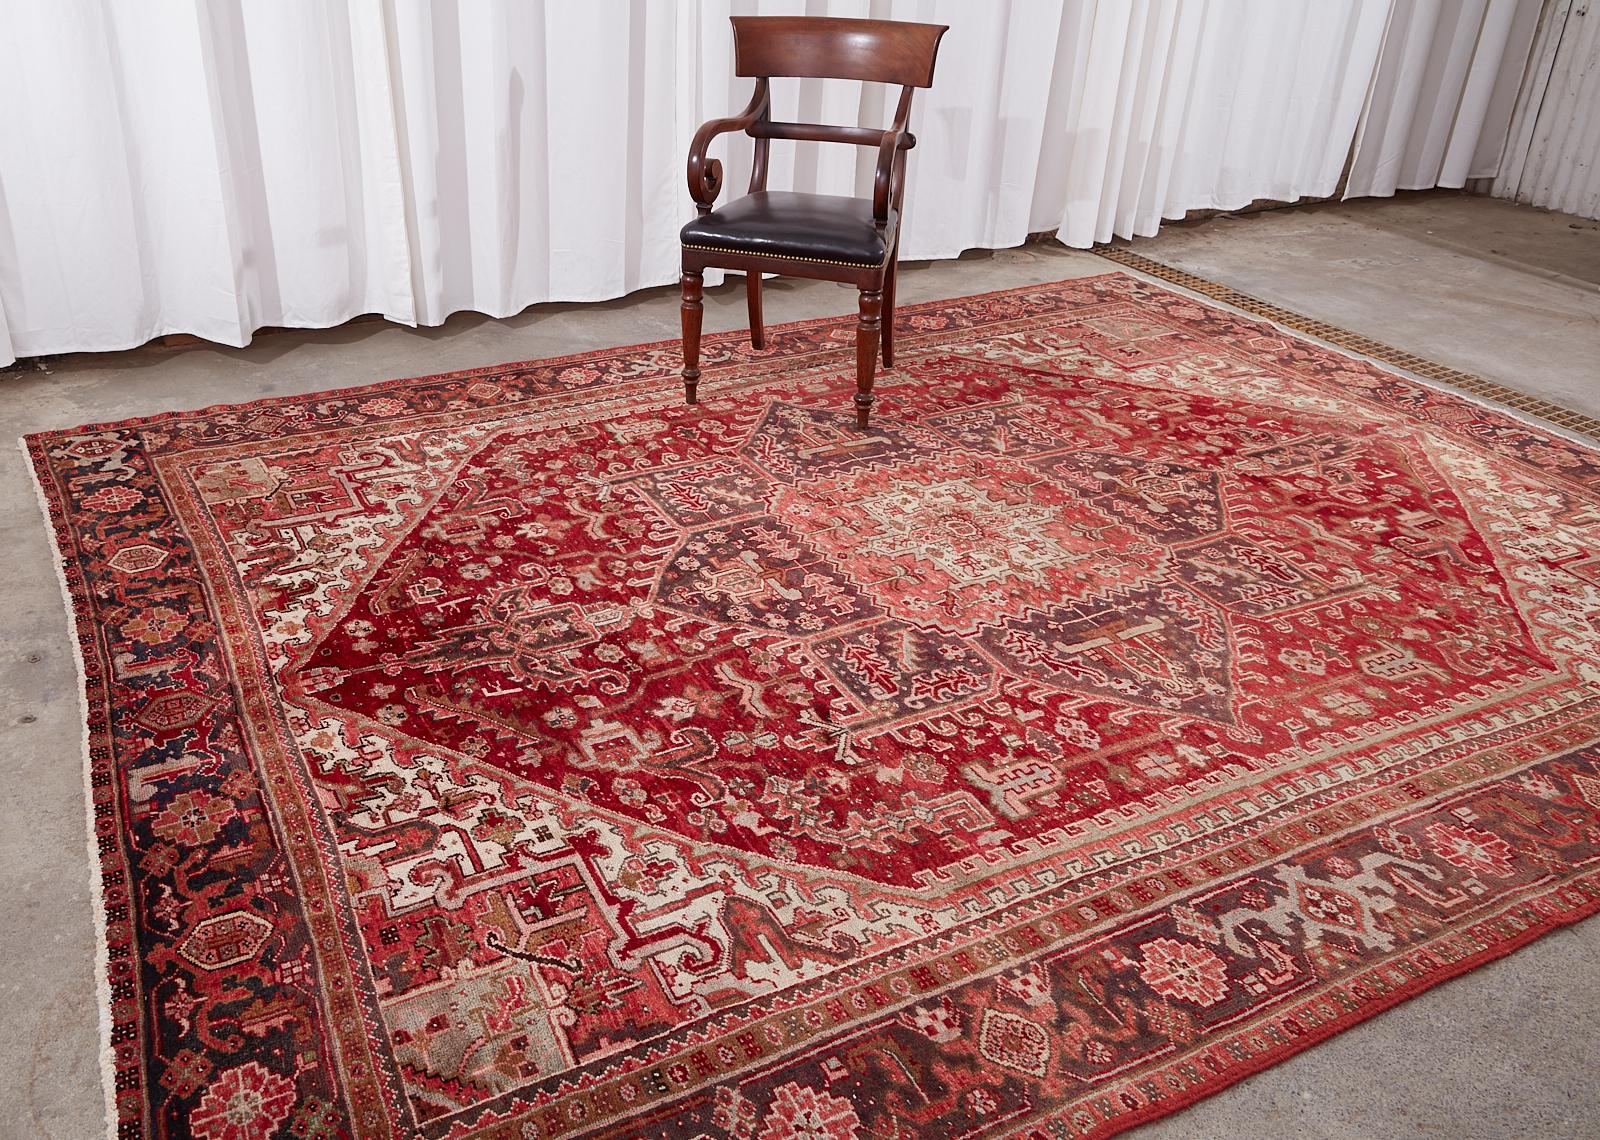 Traditionally styled vintage Persian Heriz rug crafted from hand-knotted wool. The rug features a large multi-faceted geometric star medallion with pendants. The field has triangular corners with interesting white ground accents. Stylized floral